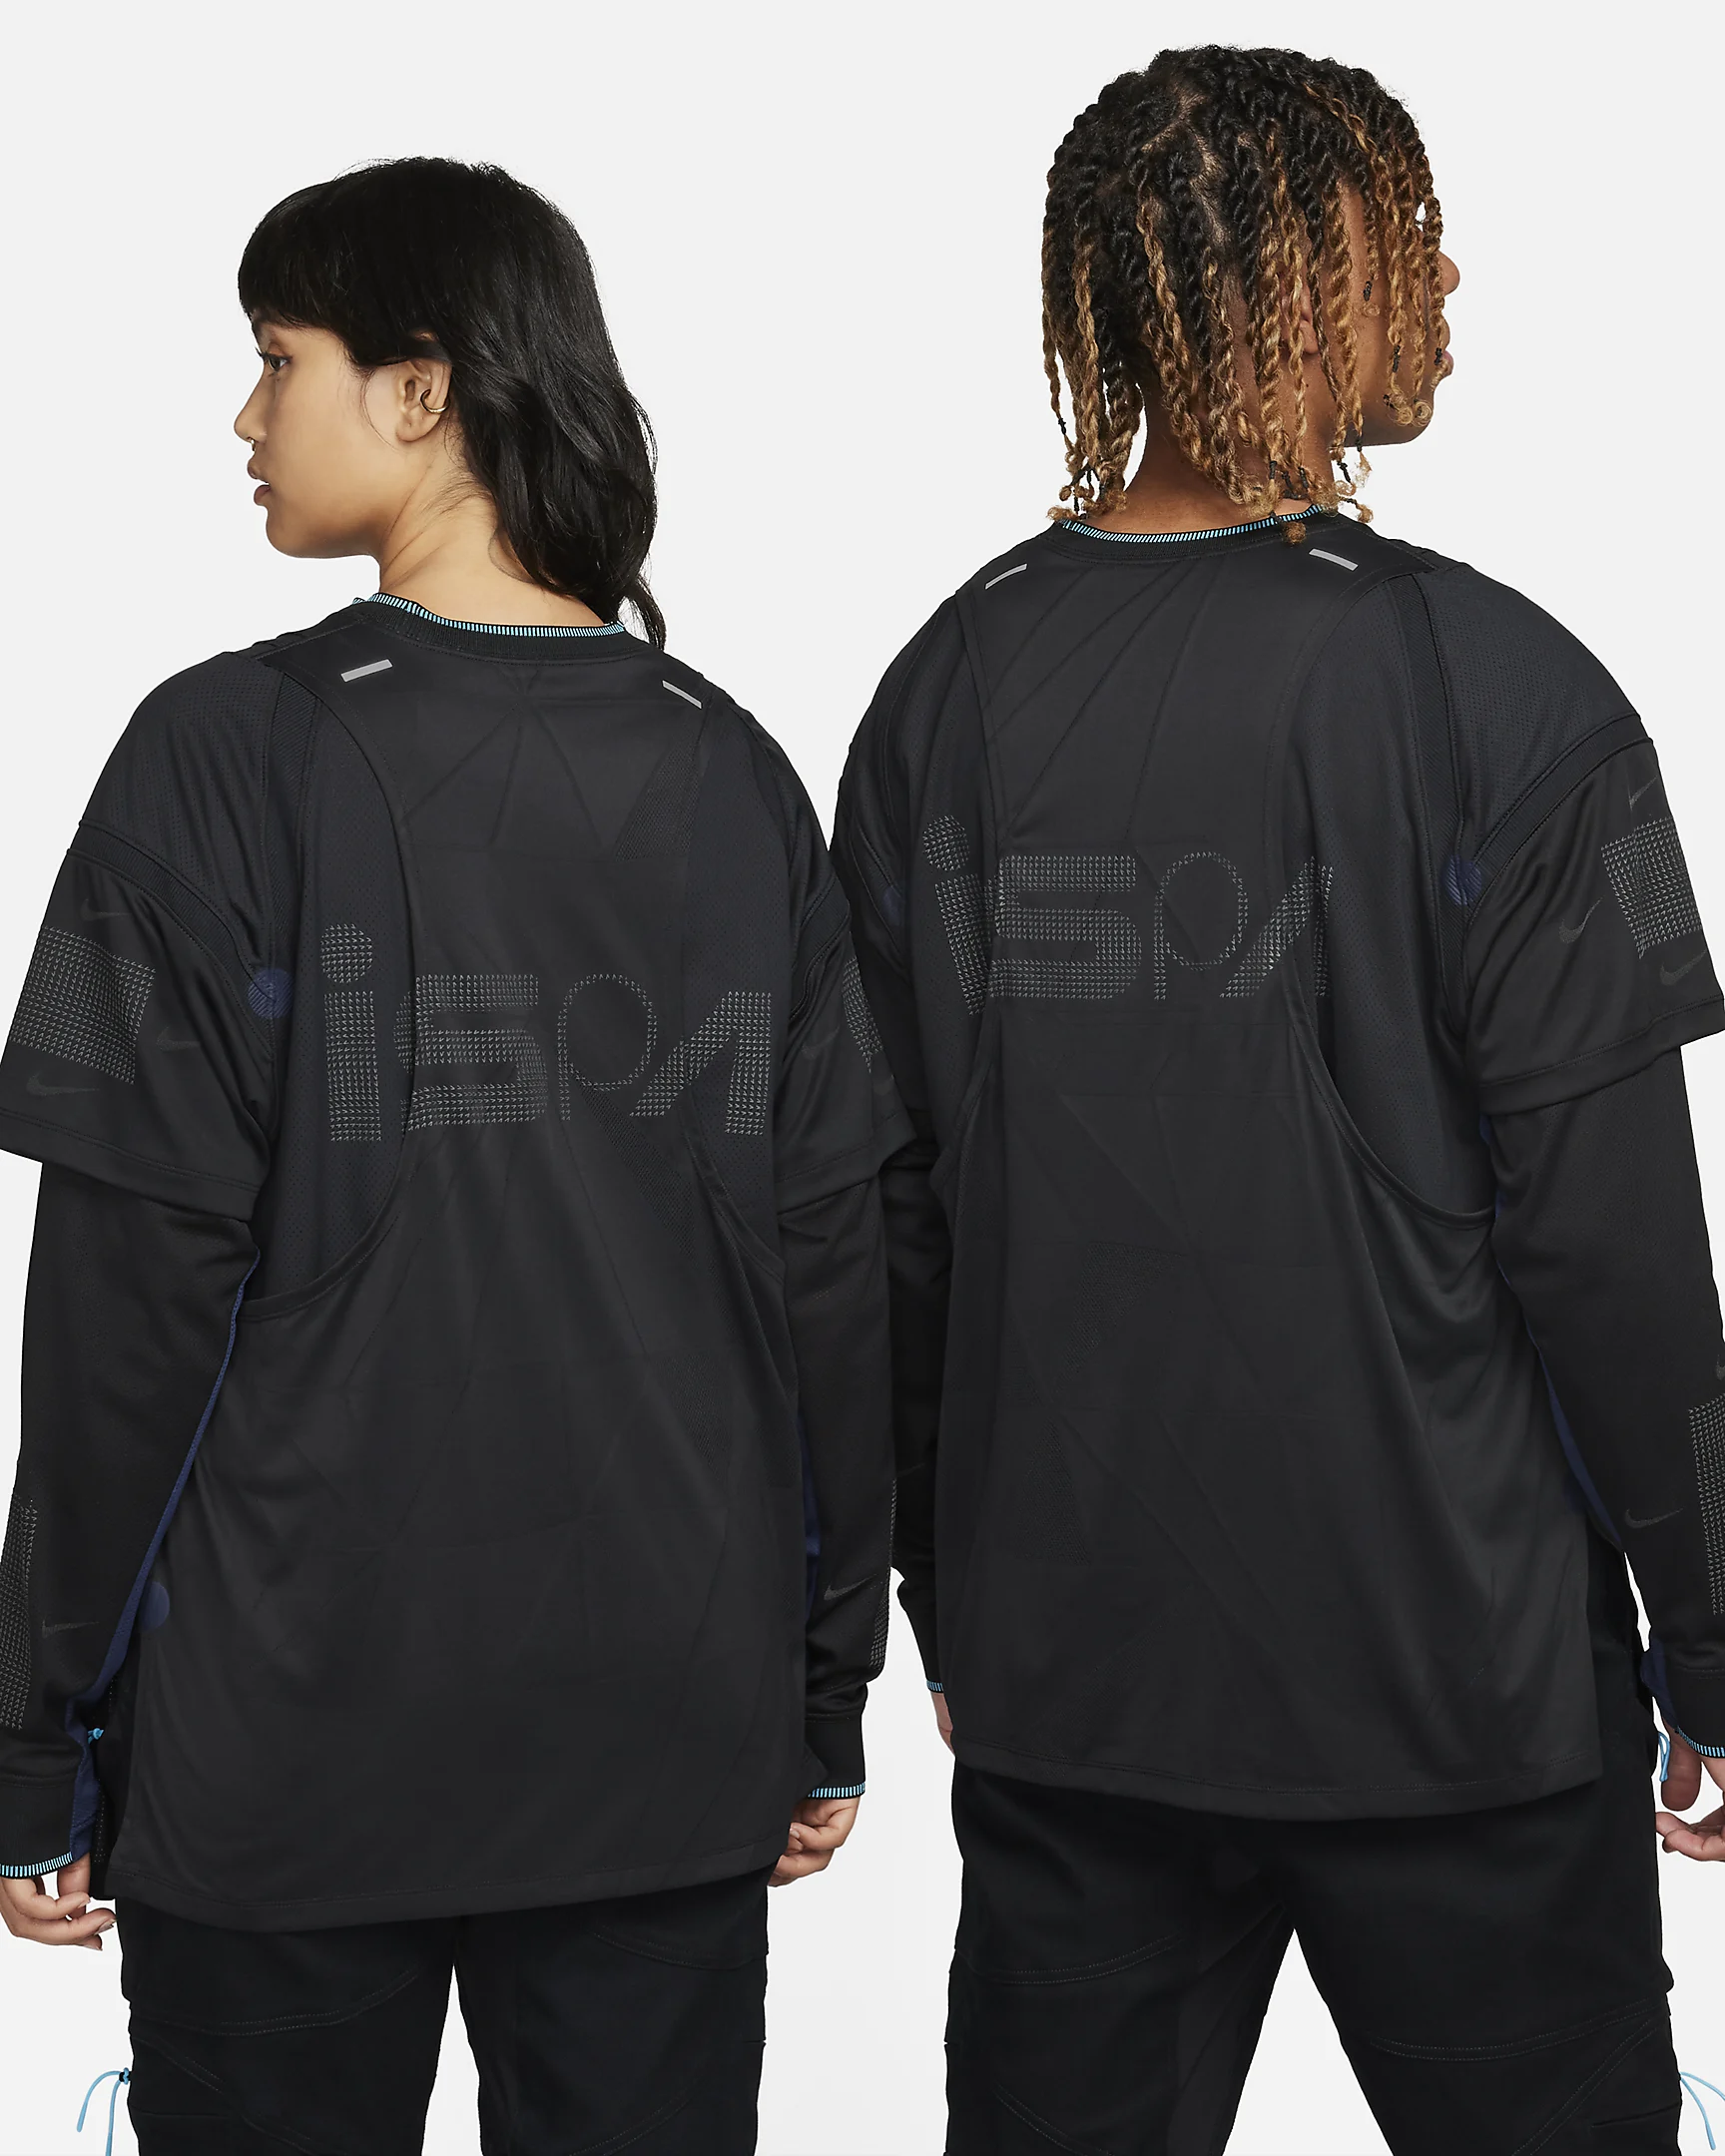 Models wear clothing from Nike ISPA's Fall 2023 collection